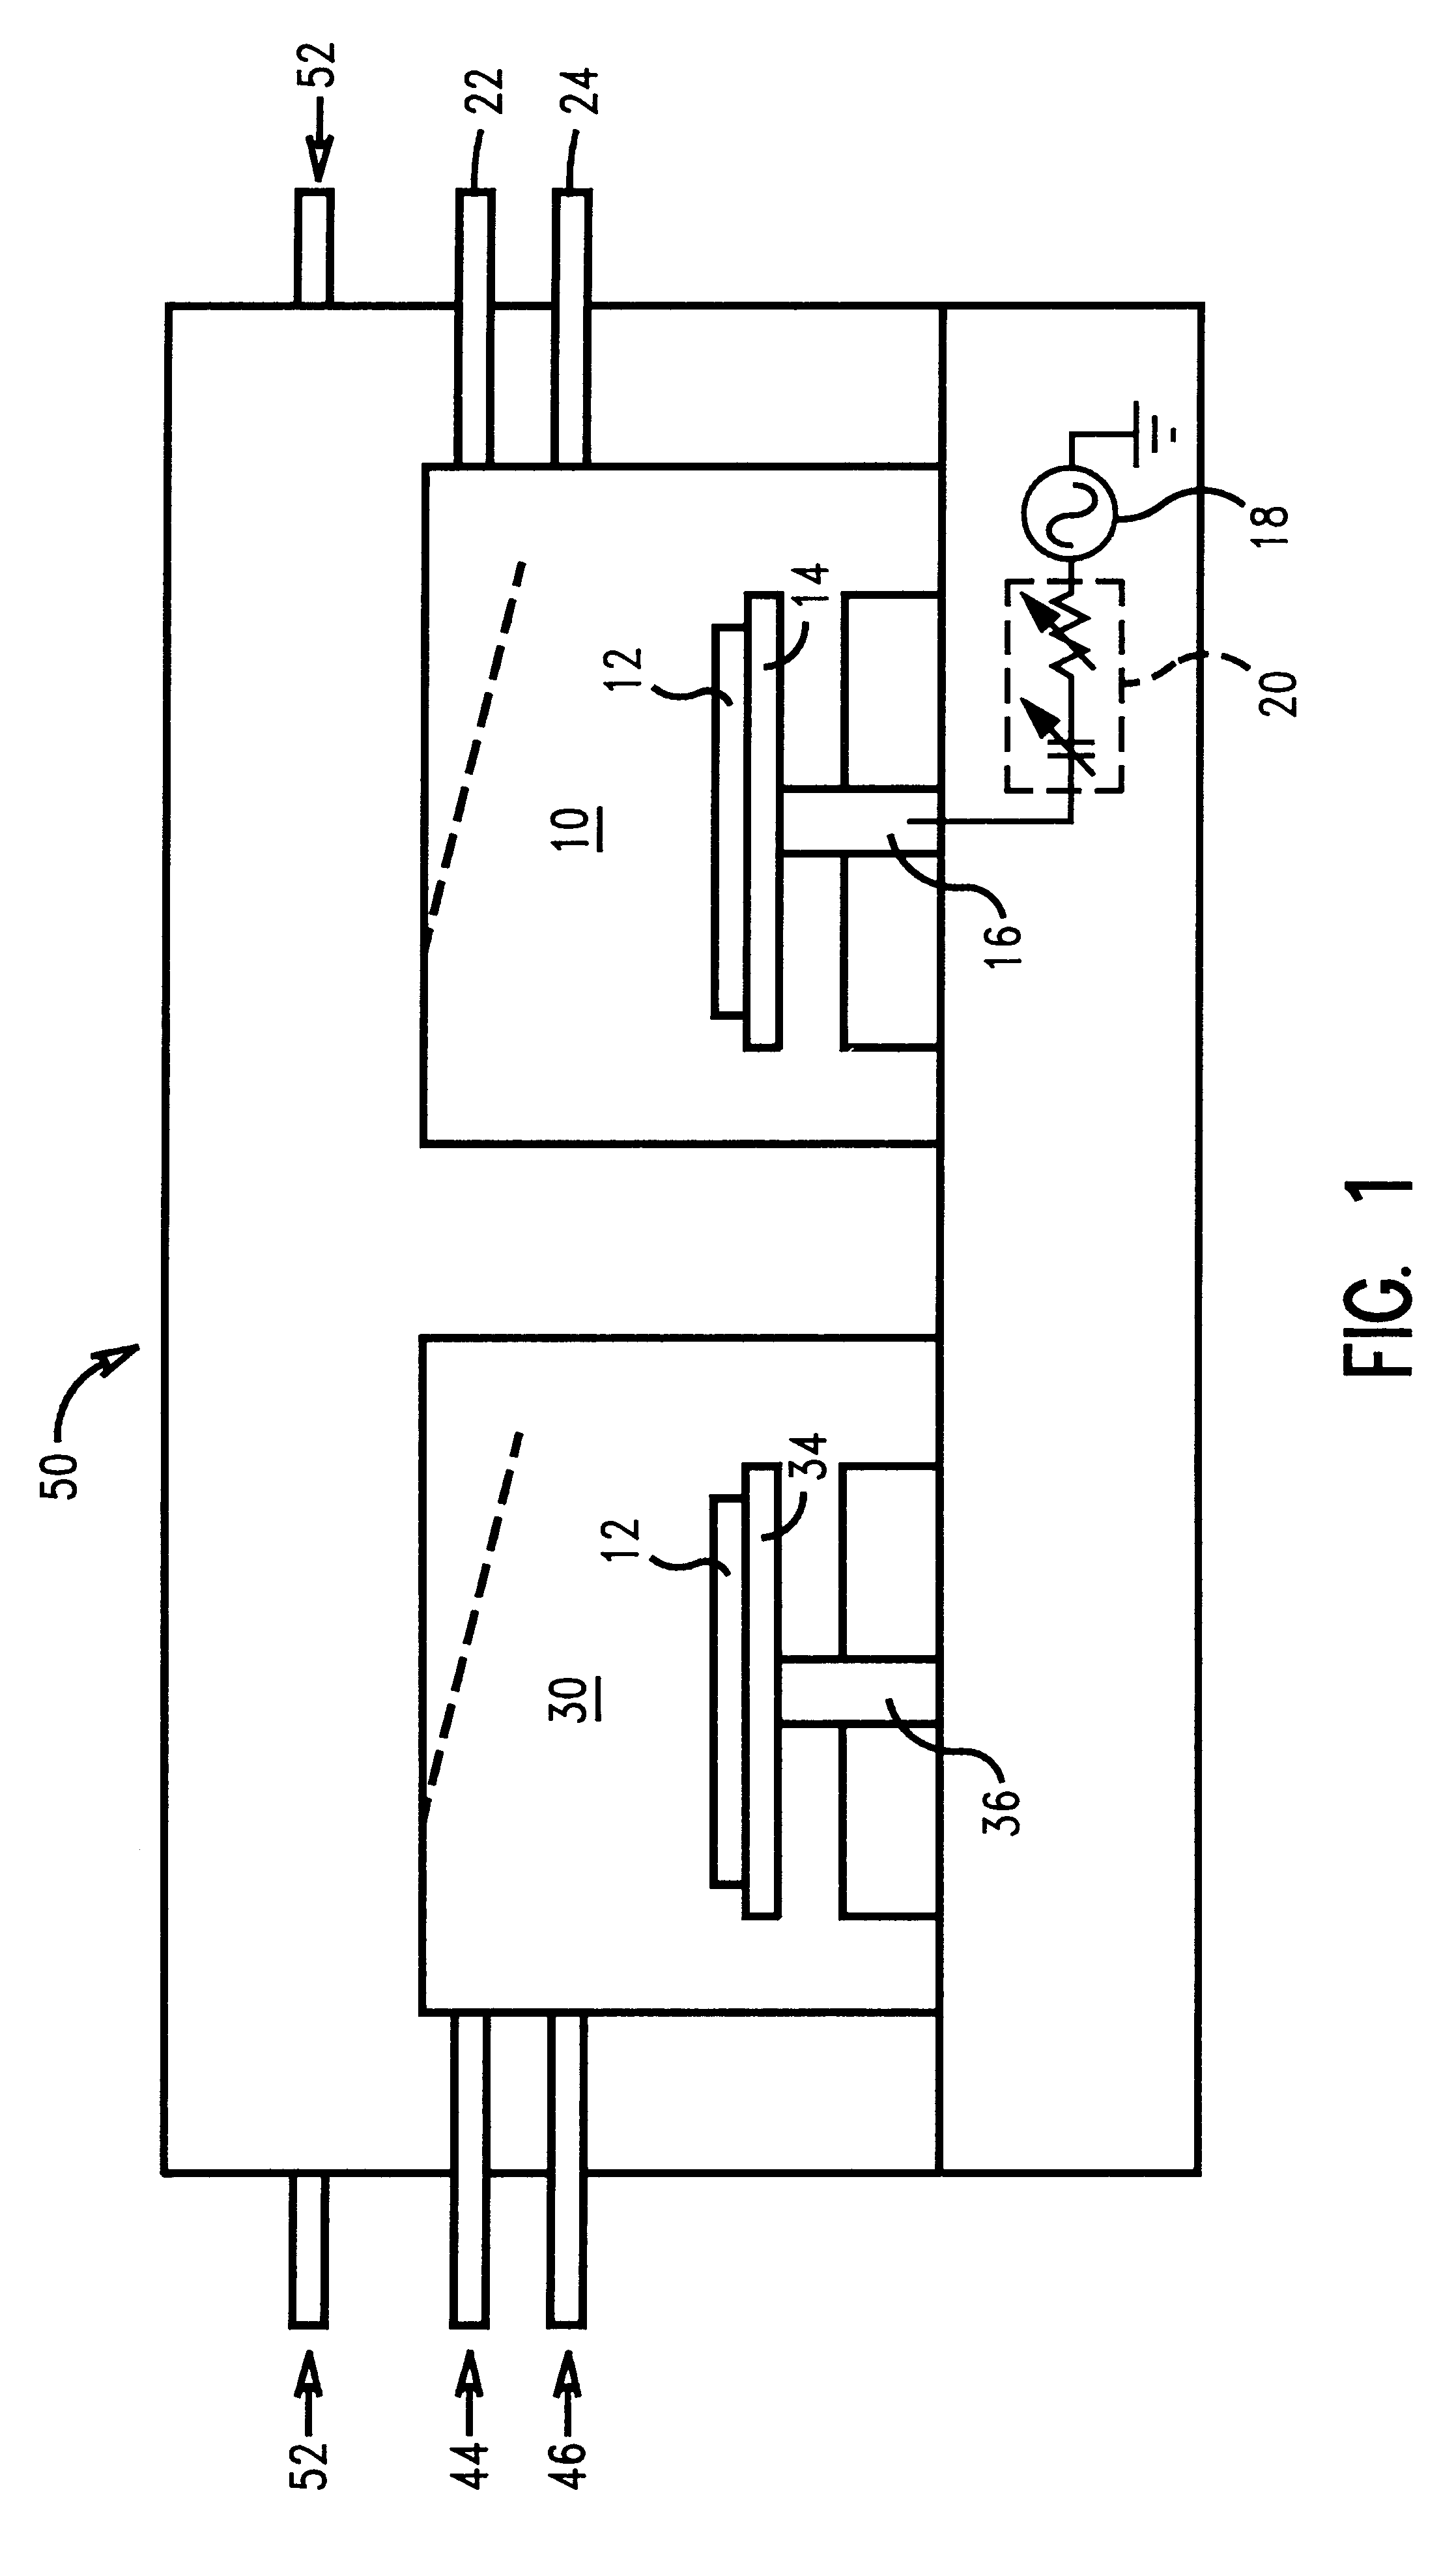 Integrated cobalt silicide process for semiconductor devices